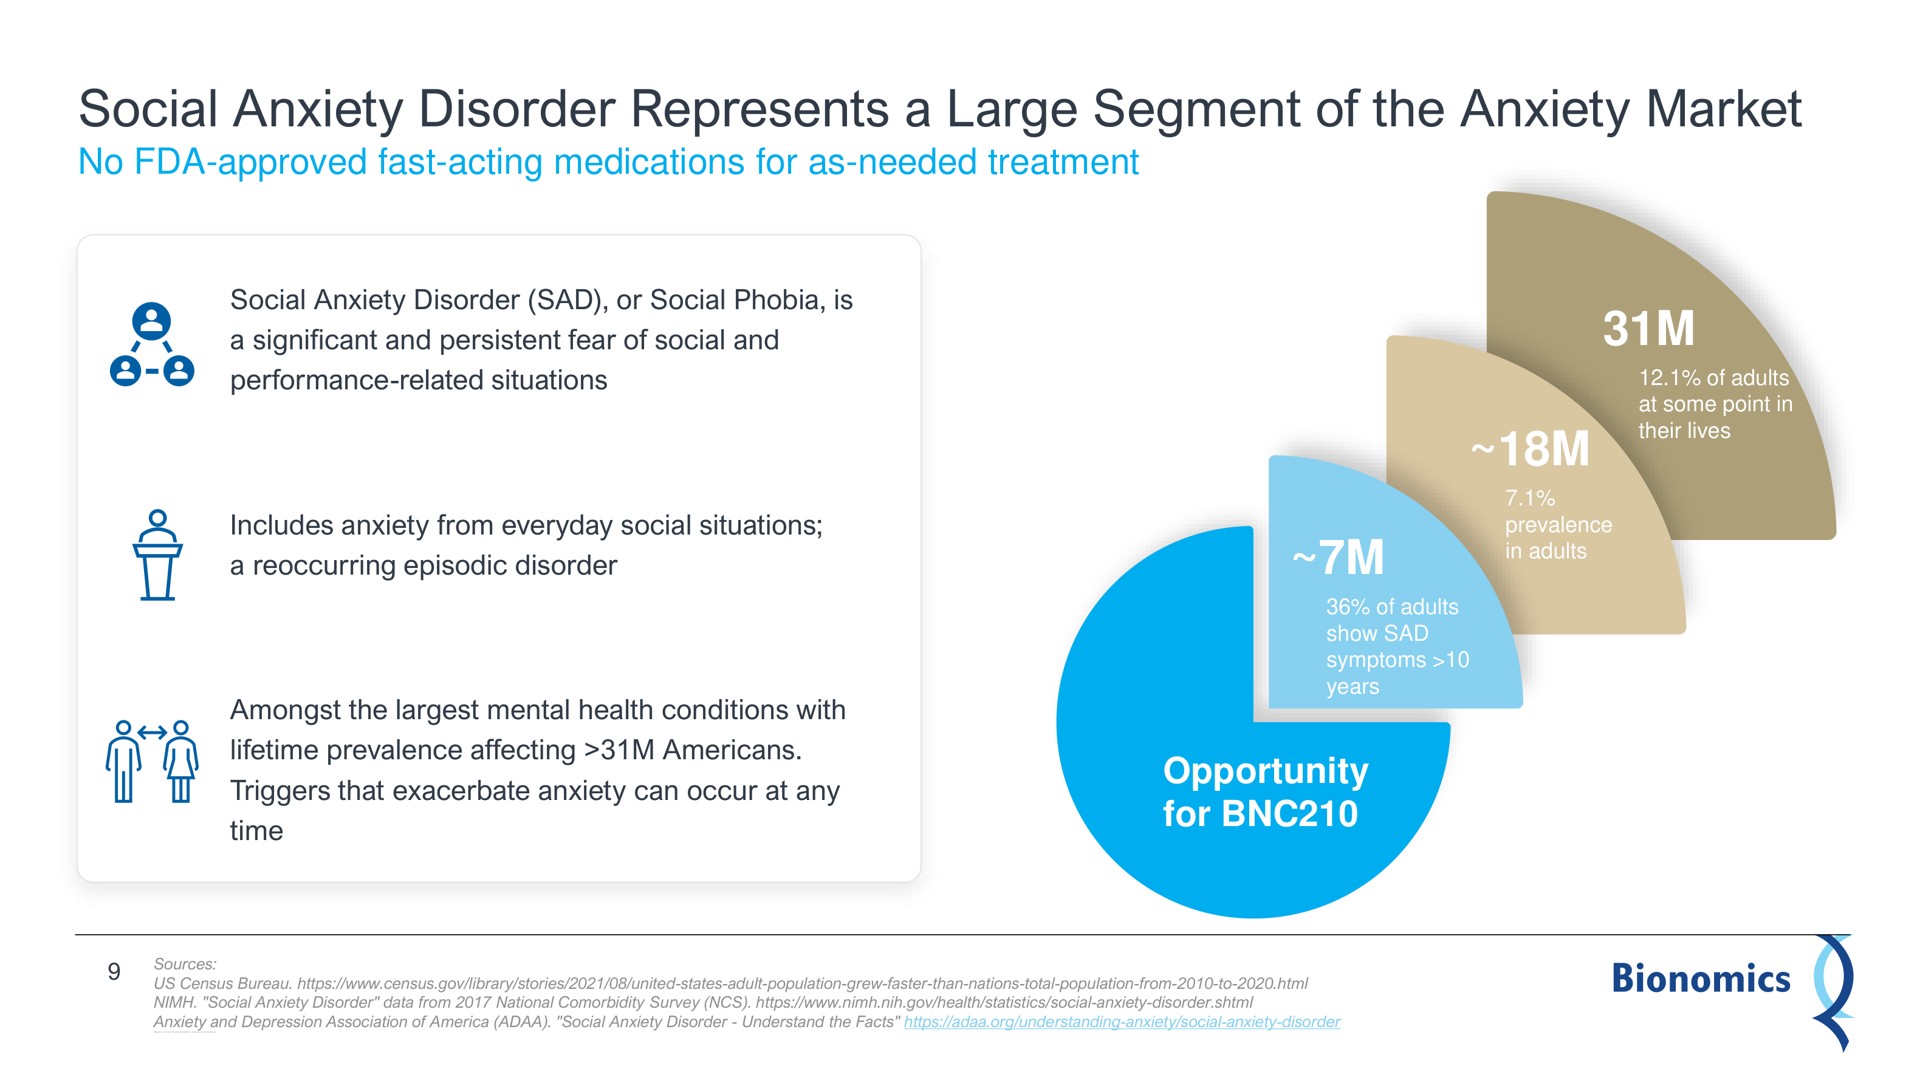 social anxiety disorder represents a large segment of the anxiety market | Bionomics